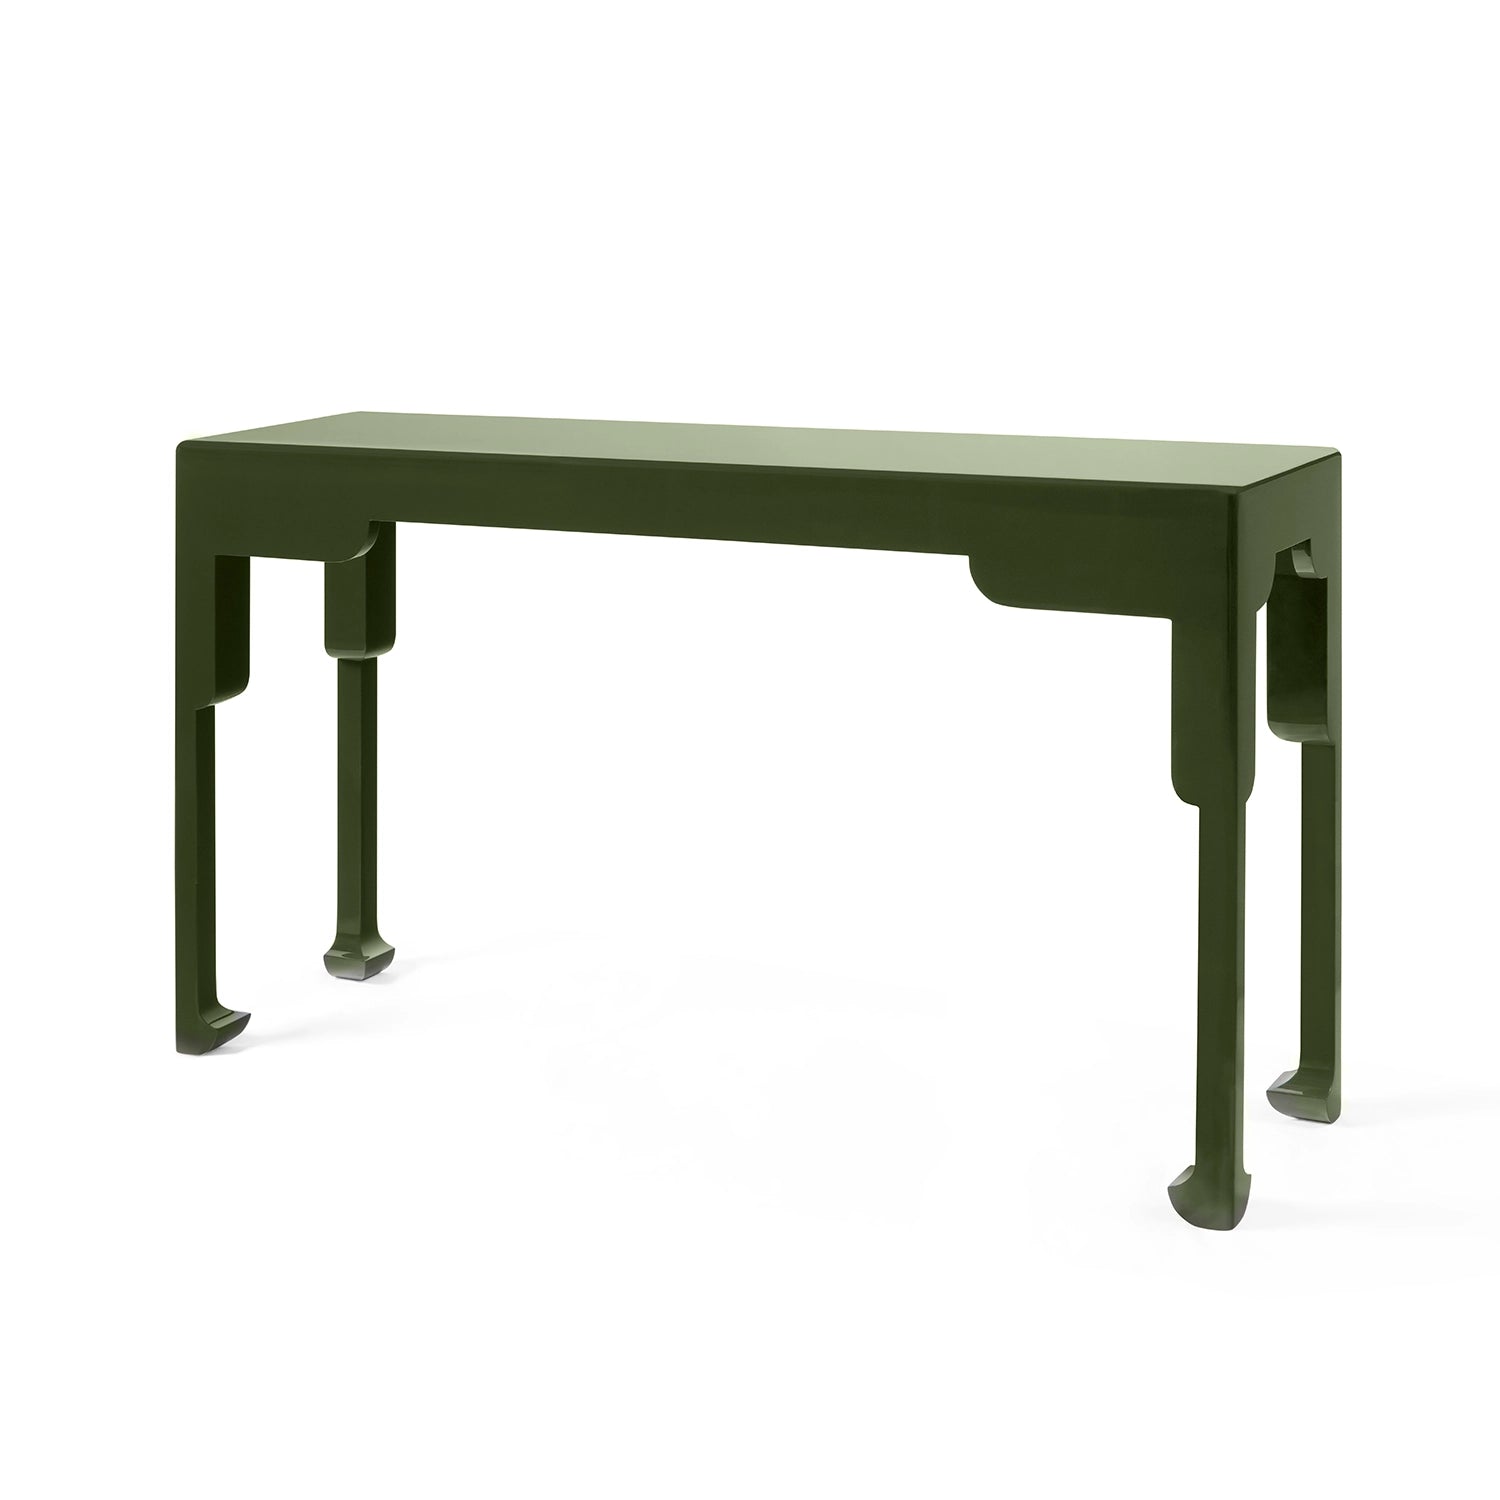 Gazebo Console Table, Off White by The Lacquer Company